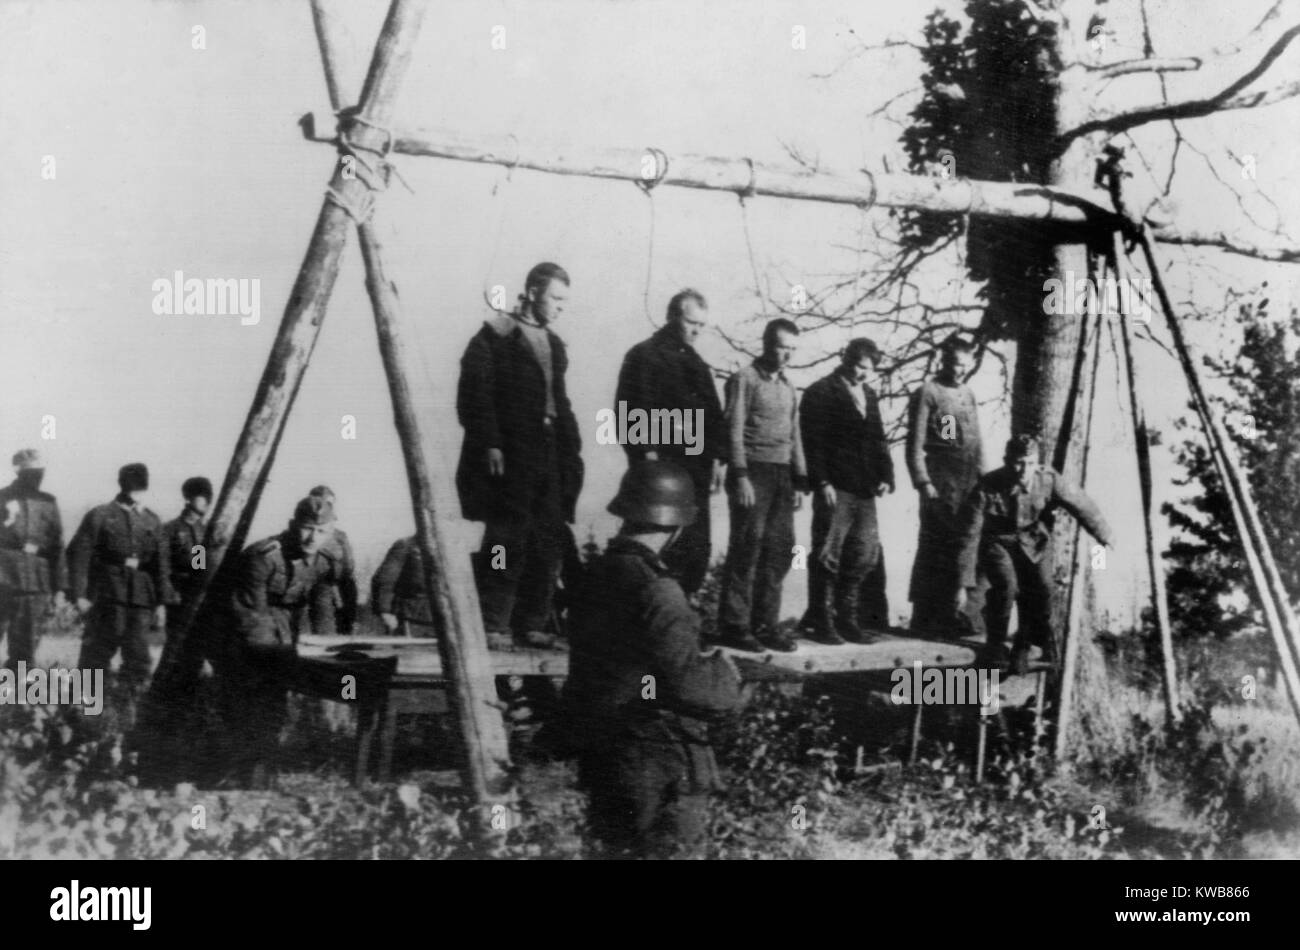 Five Soviet civilians to be hanged by German soldiers, near town of Velizh in Smolensk region. They are possibly Russian partisans or hostages executed in retaliation for partisan operations. Sept. 1941. World War 2. (BSLOC 2014 8 33) Stock Photo